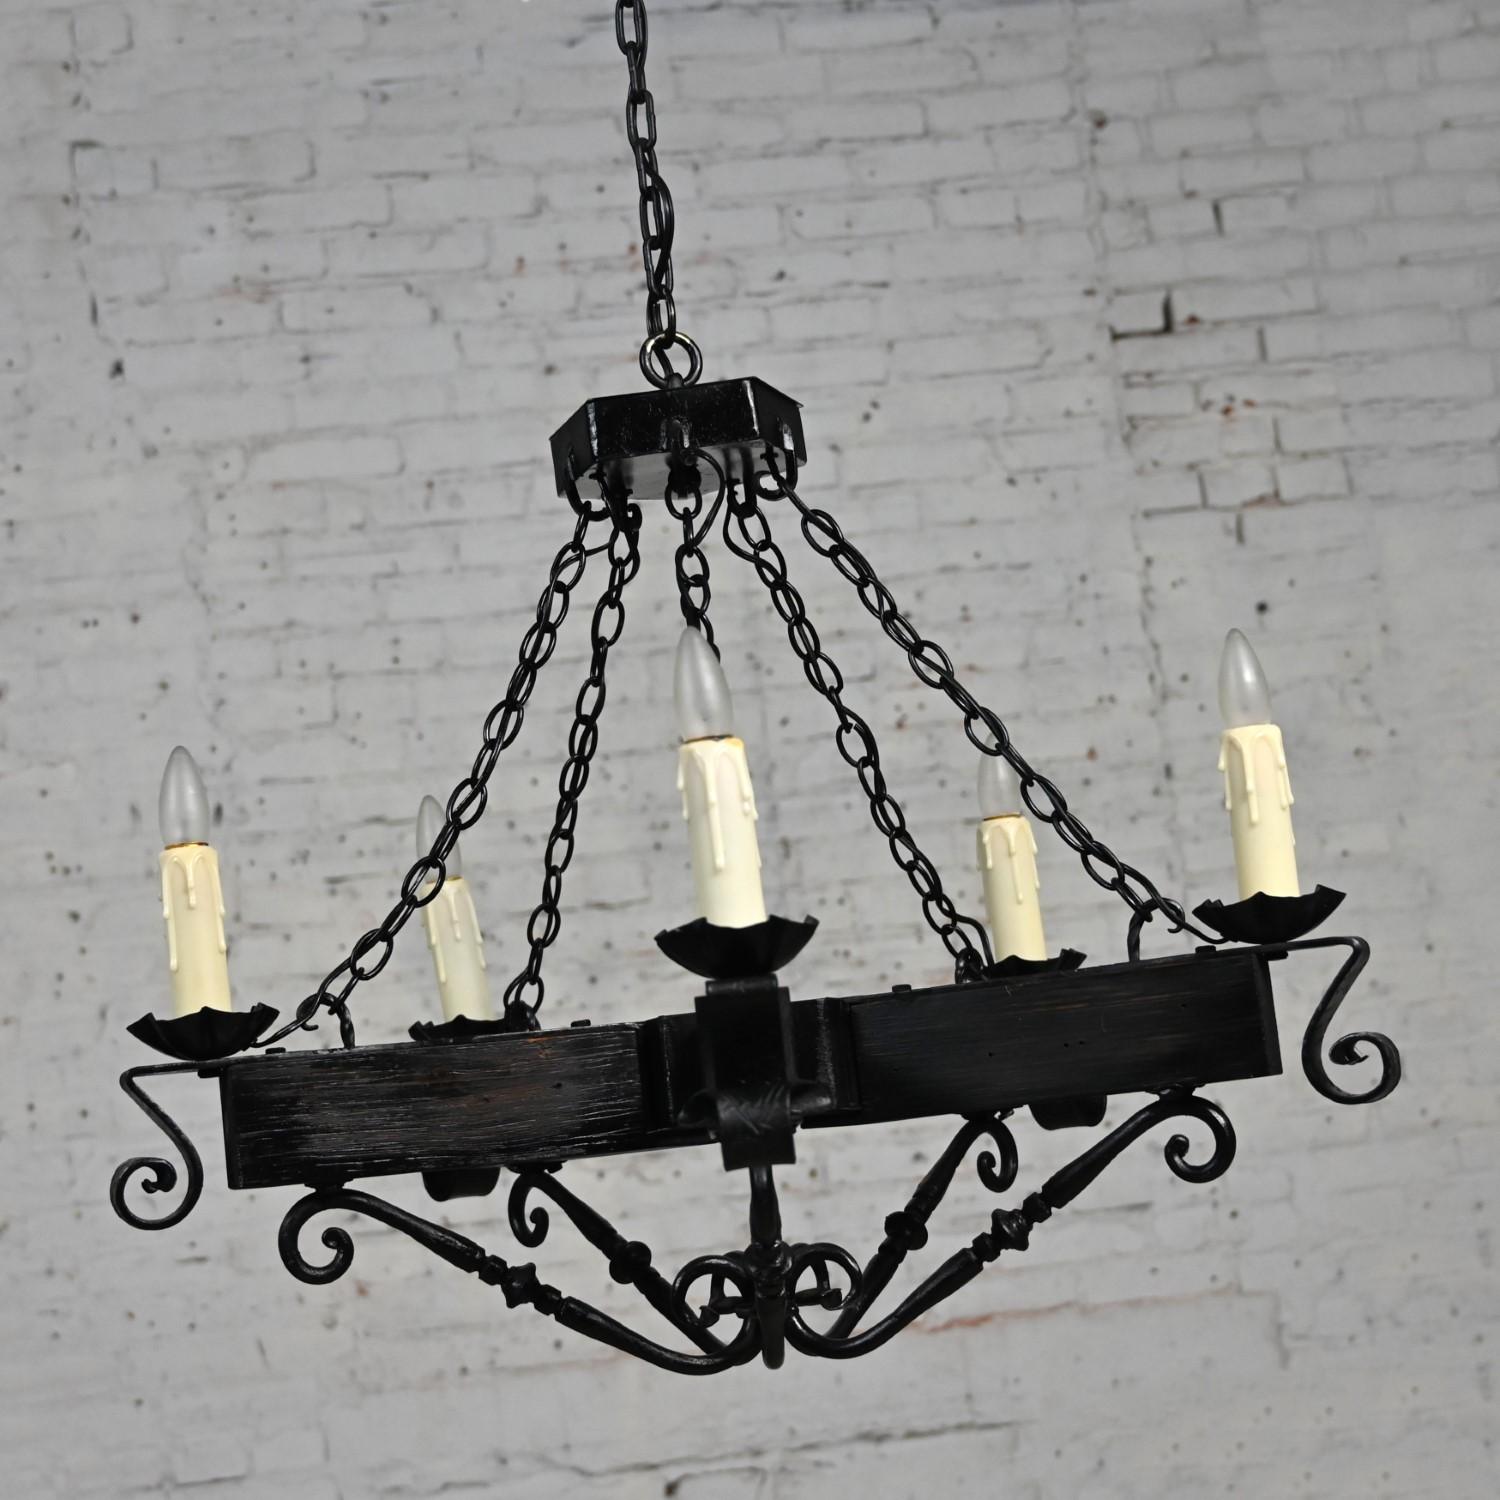 John C Virden Medieval Gothic or Spanish Revival Style Hanging Light Fixture  For Sale 13